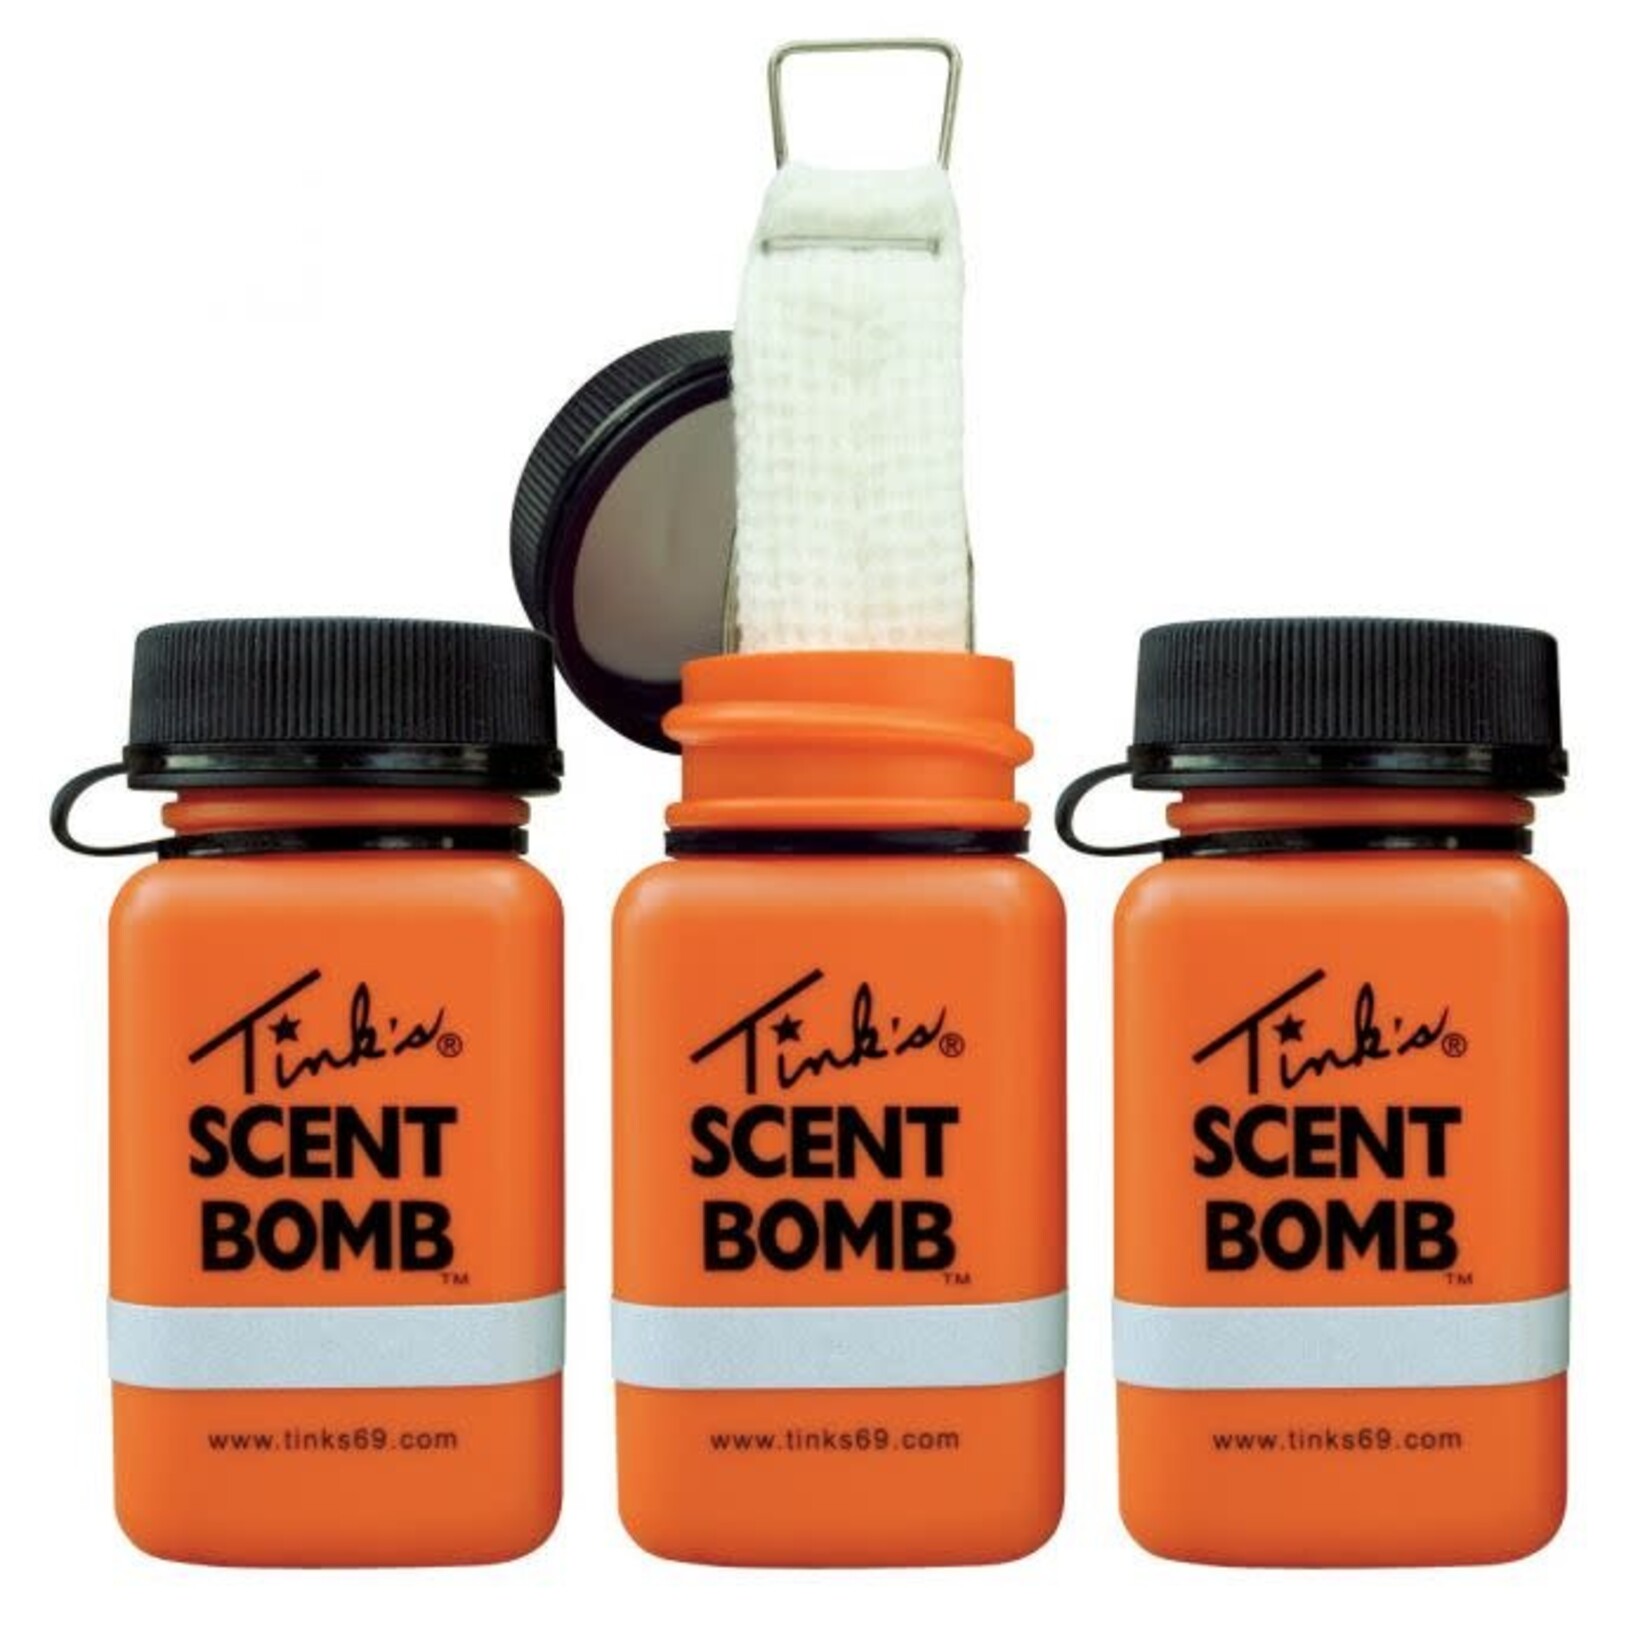 Tink's Tinks Scent Bomb Scent Dispensers, 3 pack